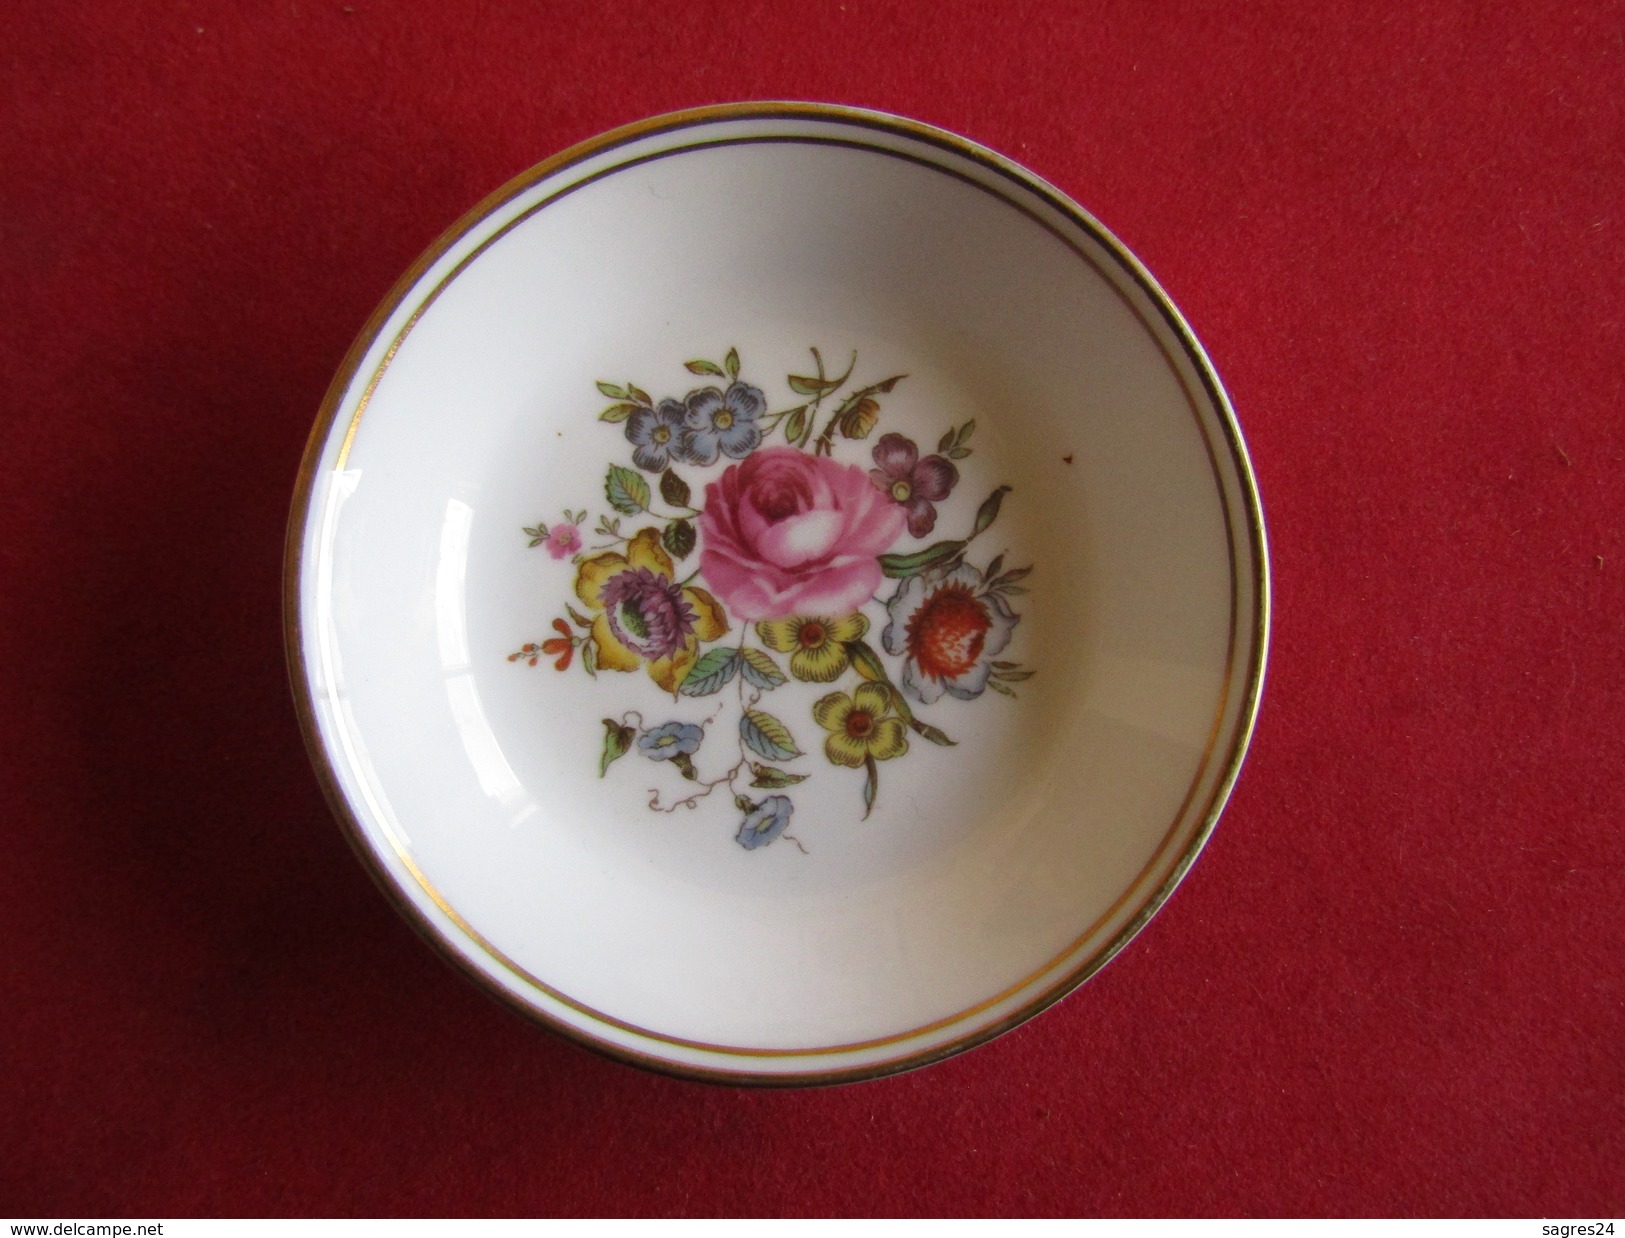 Antique Small Porcelain Royal Worcester - With Best Wishes From Edgar Purkhardt Christmas 1955 - Royal Worcester